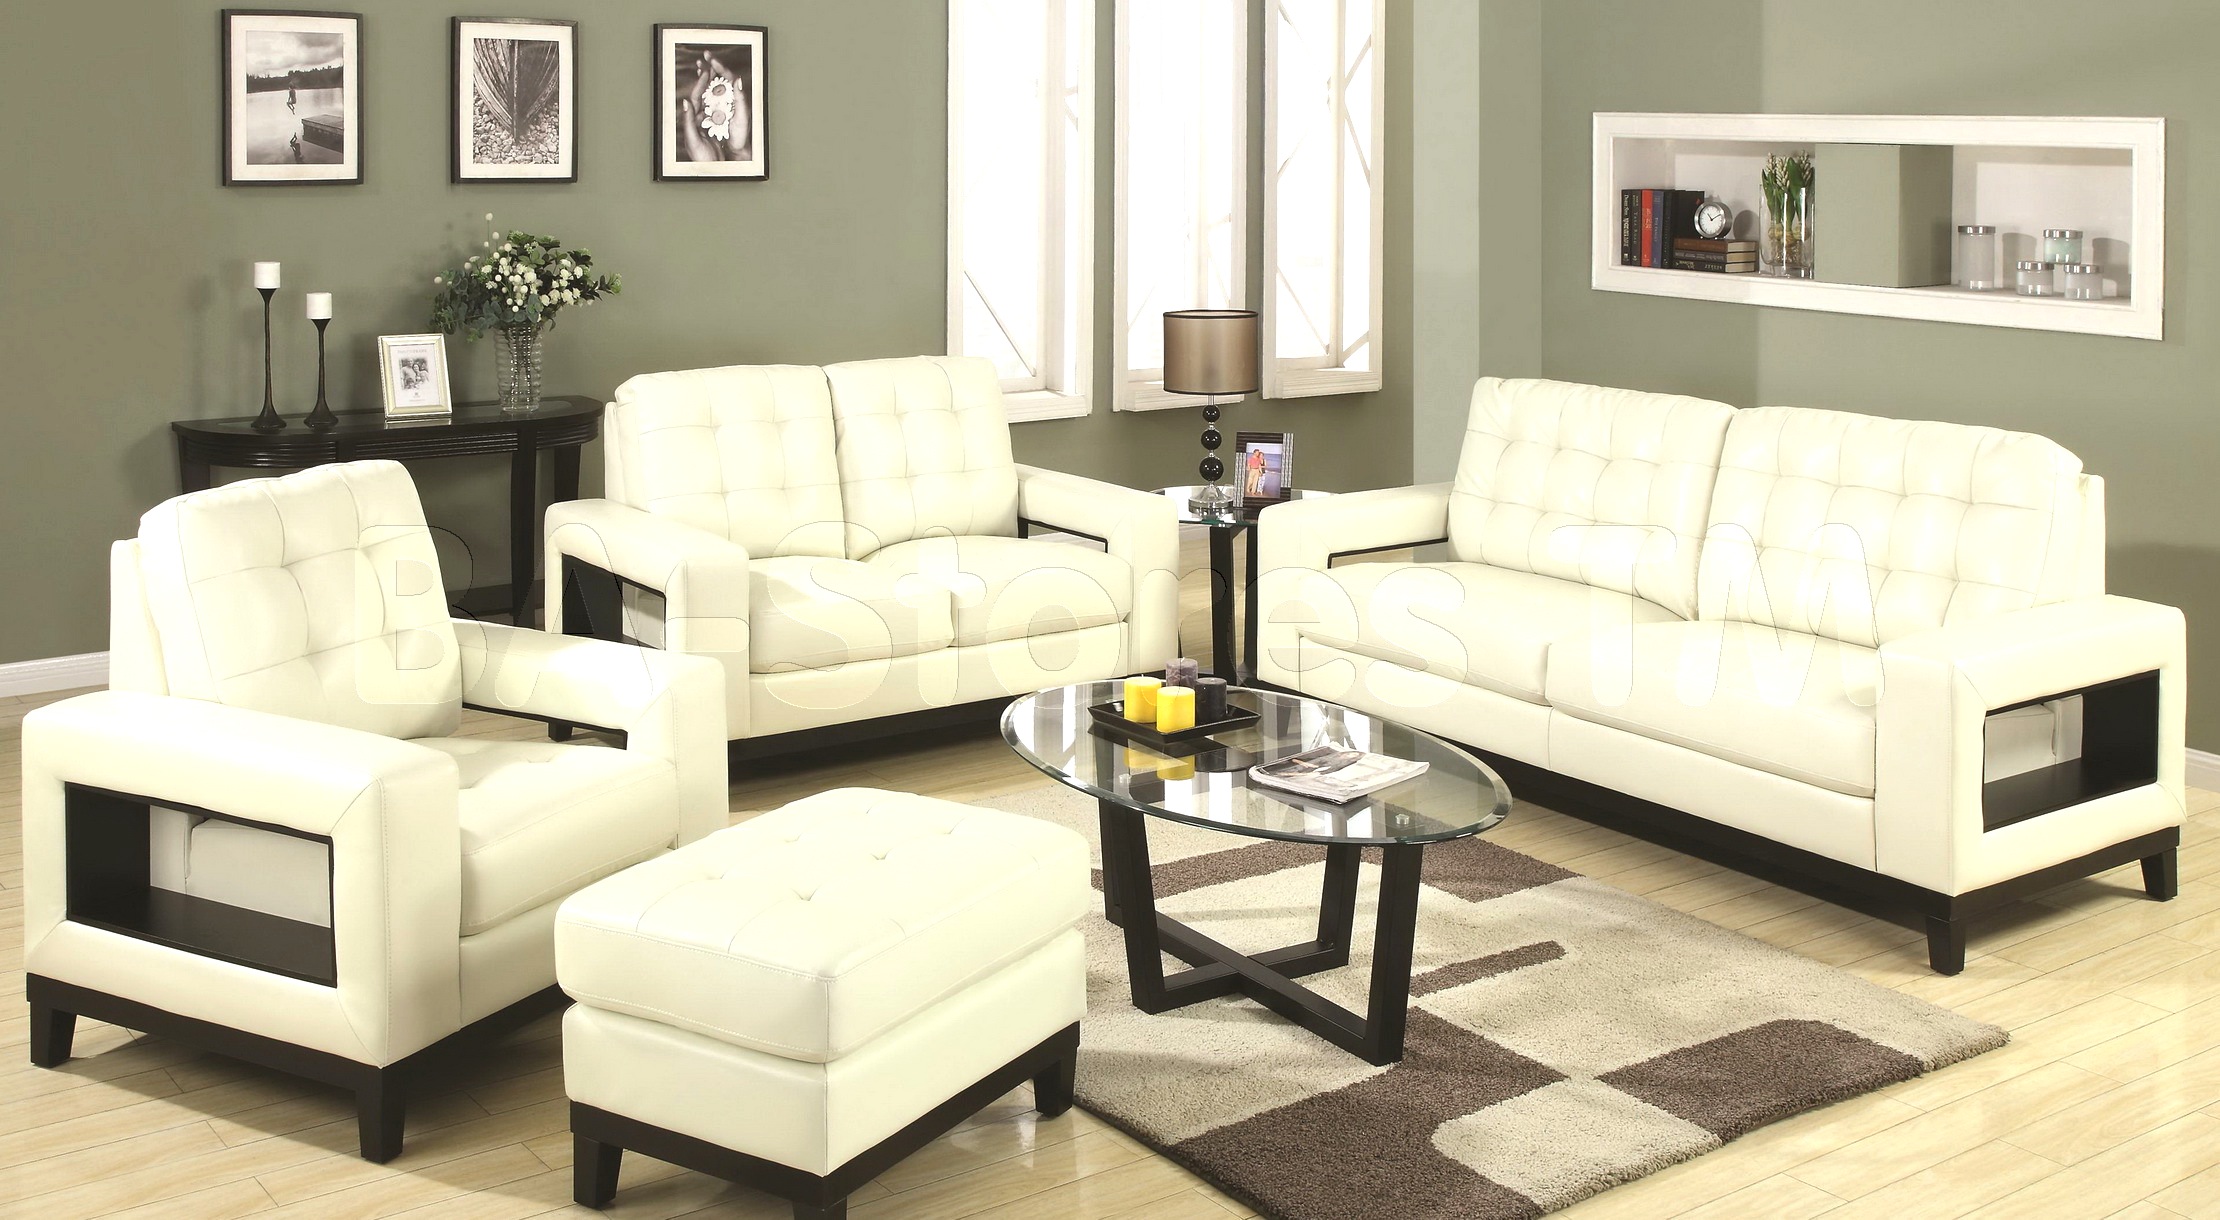 living room with white furniture photo - 3